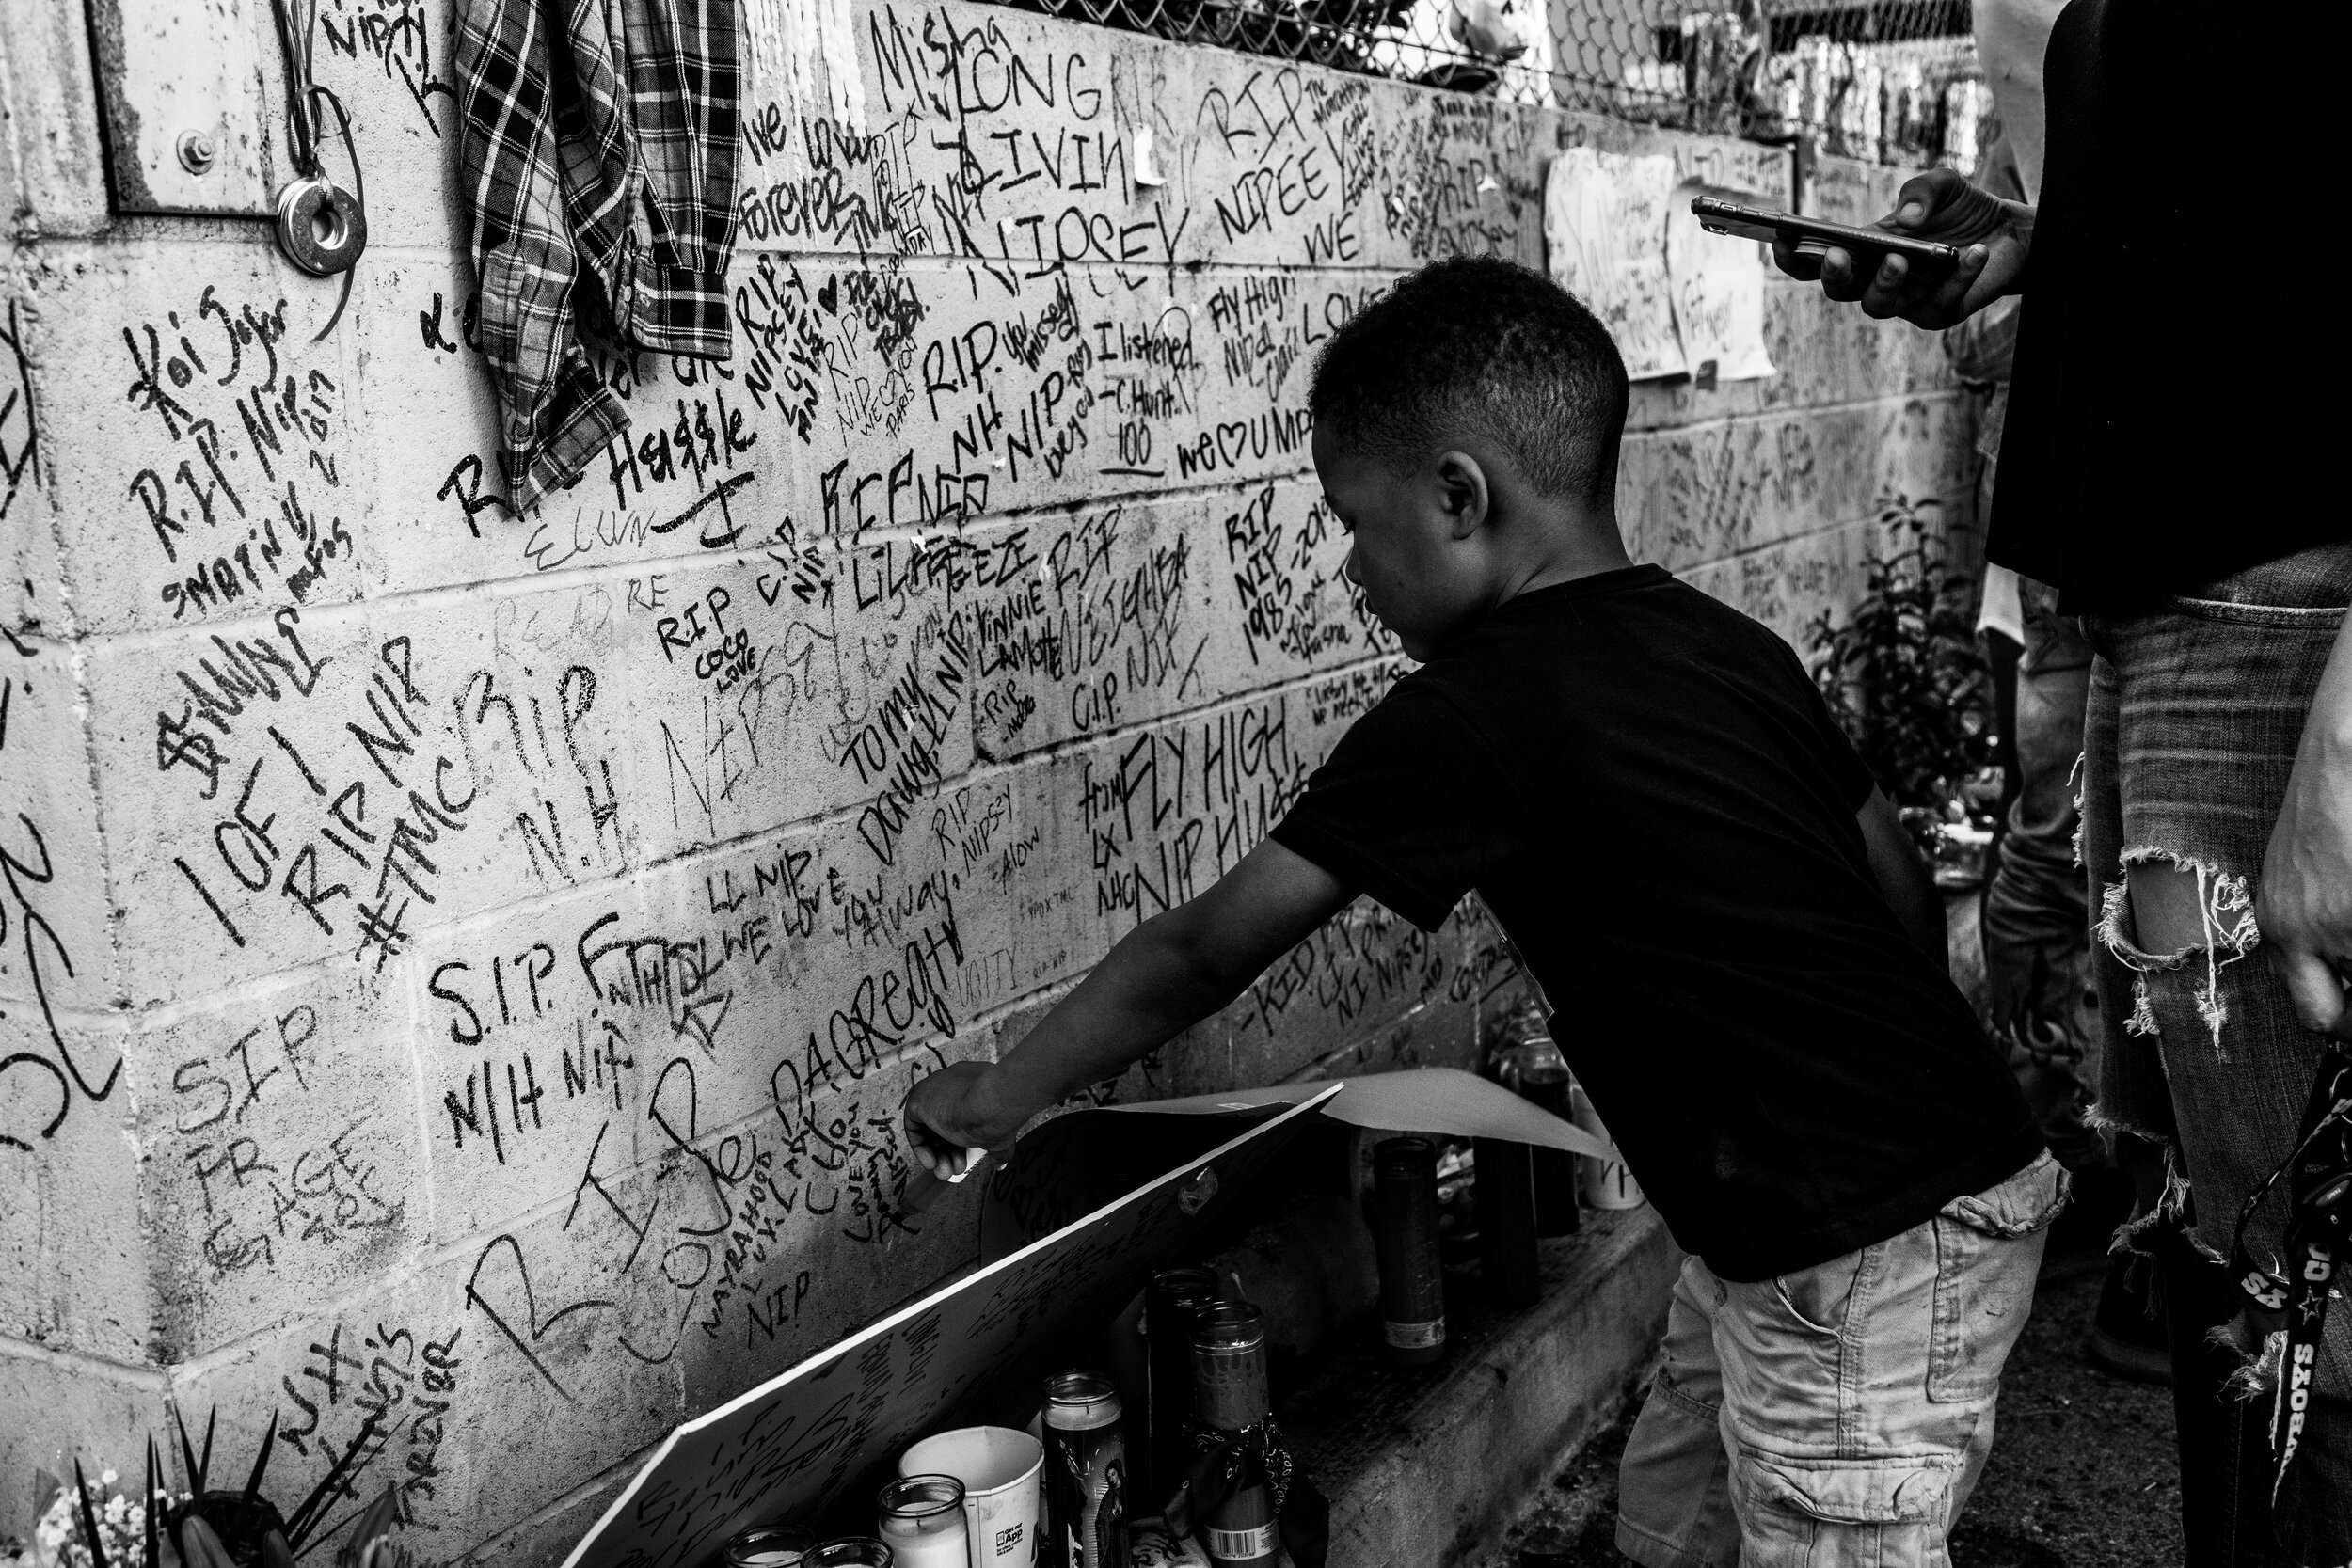  A young boy writes his farewell message to Nipsey Hussle on the wall in the alley next to the Marathon Clothing Store.  